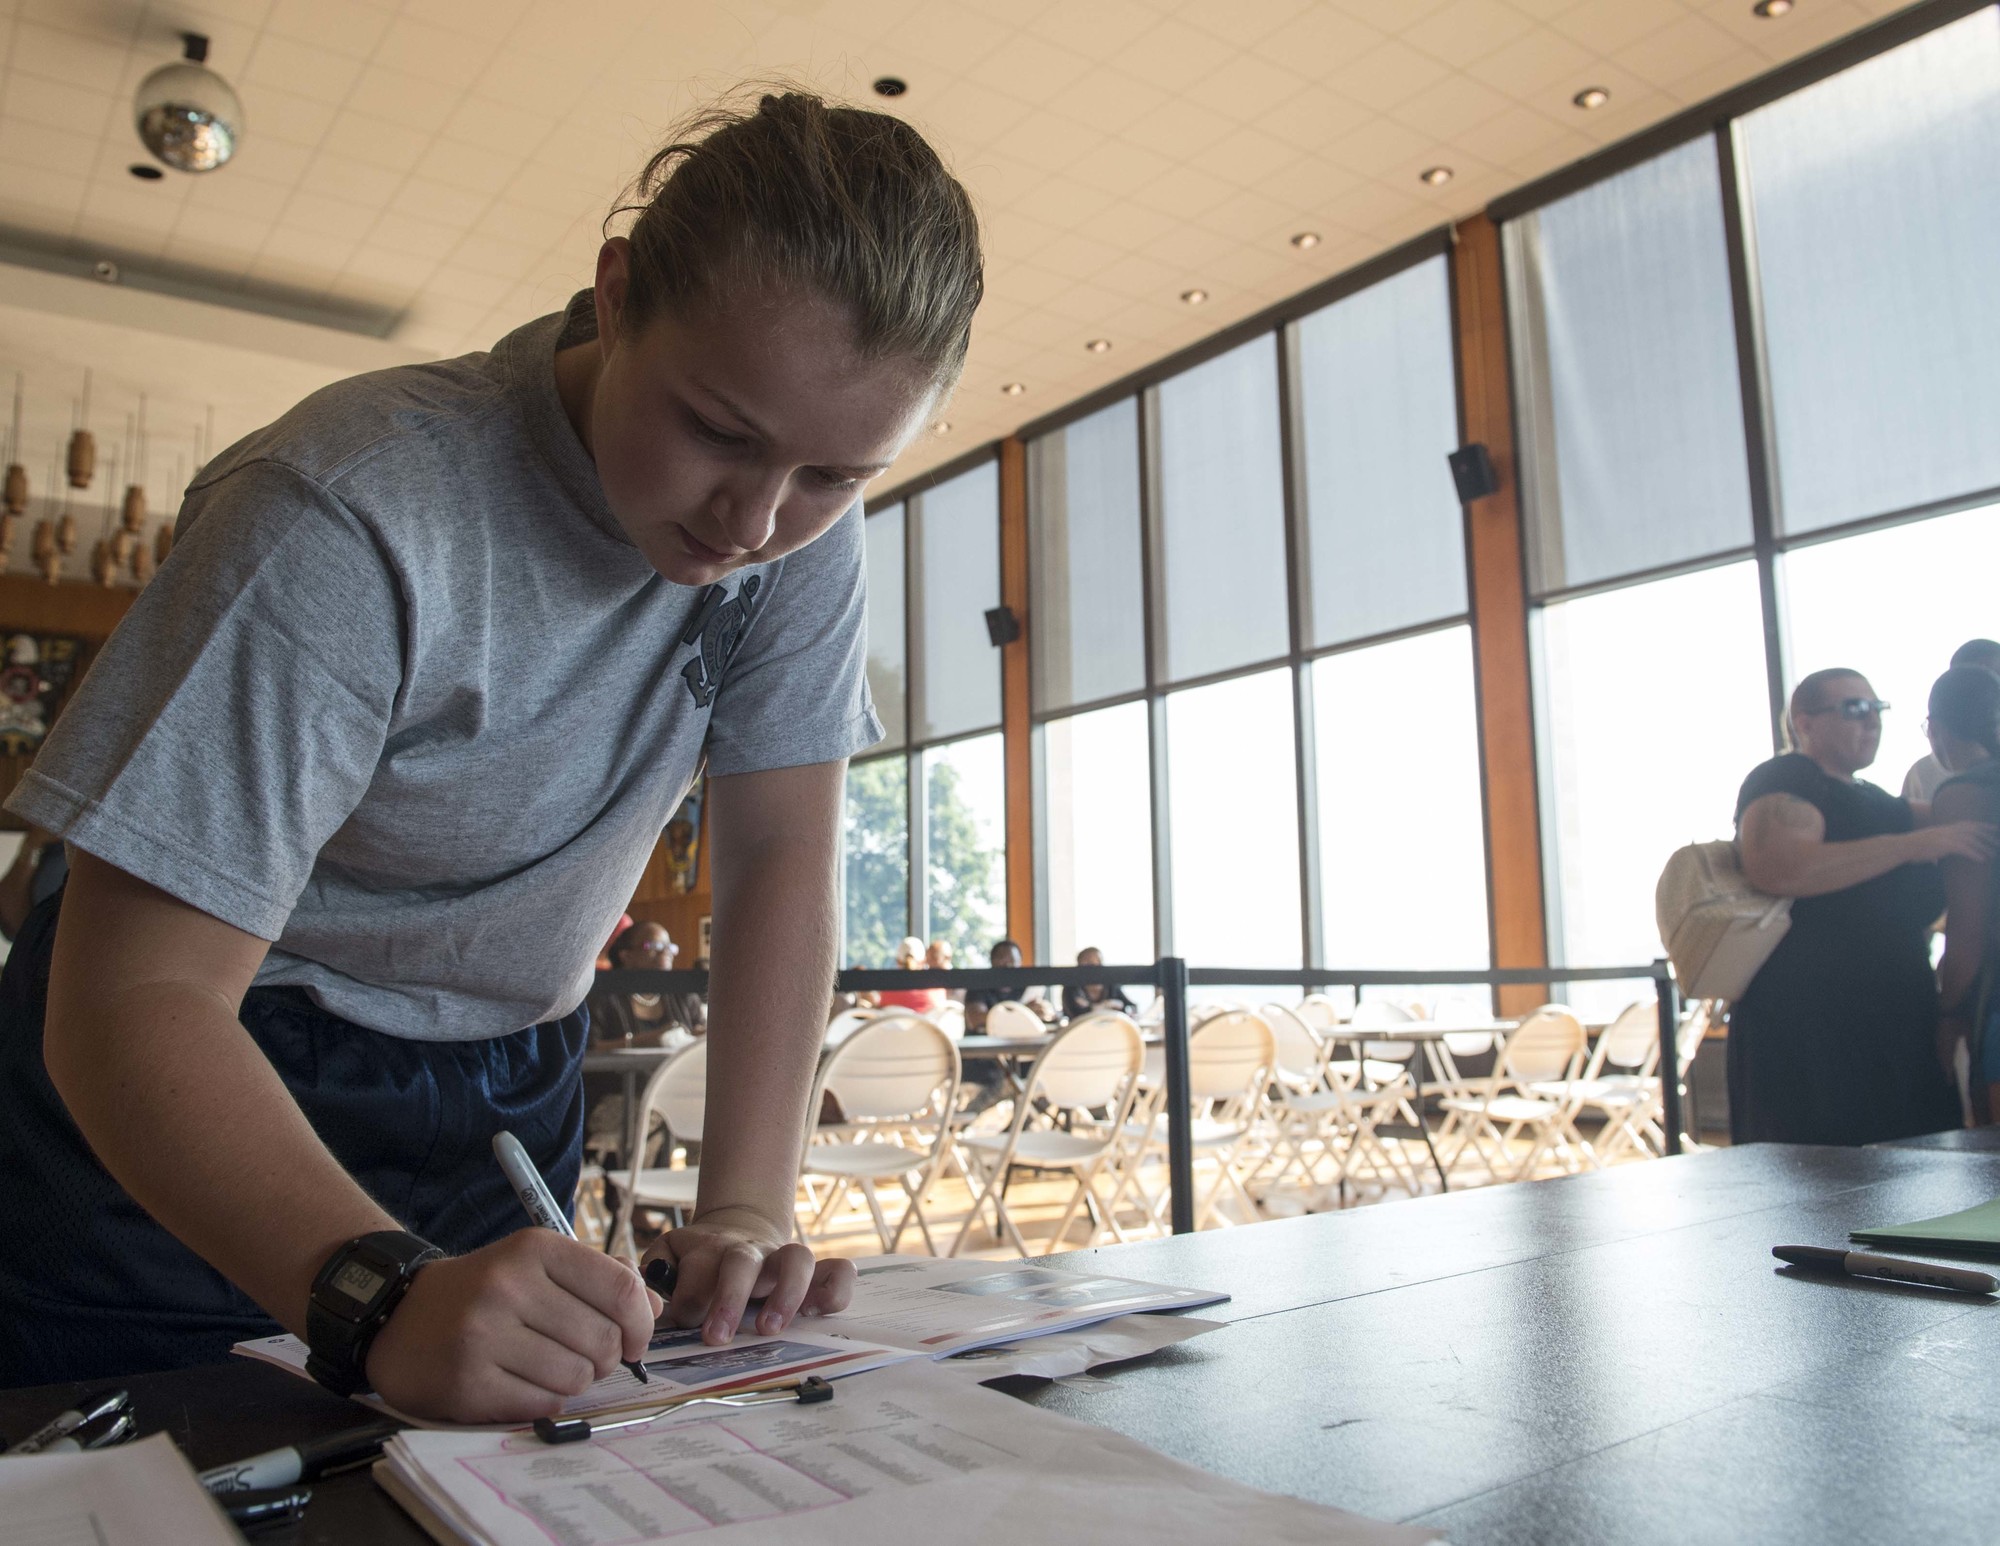 Coast Guard Academy Scholar Lauren Daugherty, of Calvert County, Md., checks in for her 3-week orientation program before departing to Georgia Military College, July 16, 2018. 